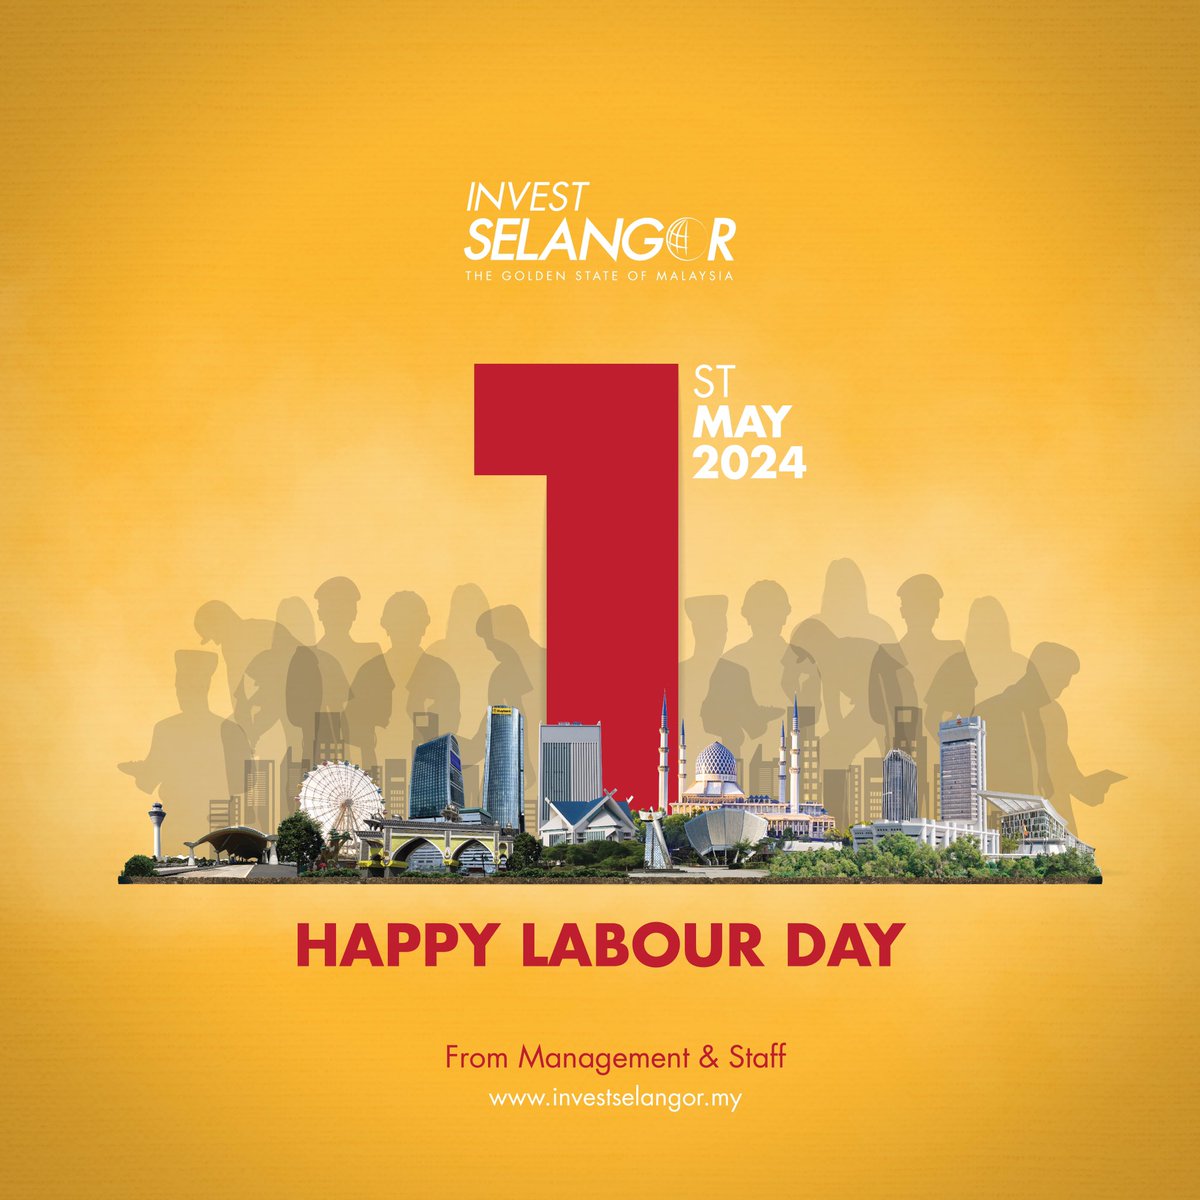 Sending our appreciation and respect to the workers of every field. Happy Labour Day from all of us at Invest Selangor! #InvestSelangor #KitaSelangorMajuBersama #Selangor #LabourDay2024